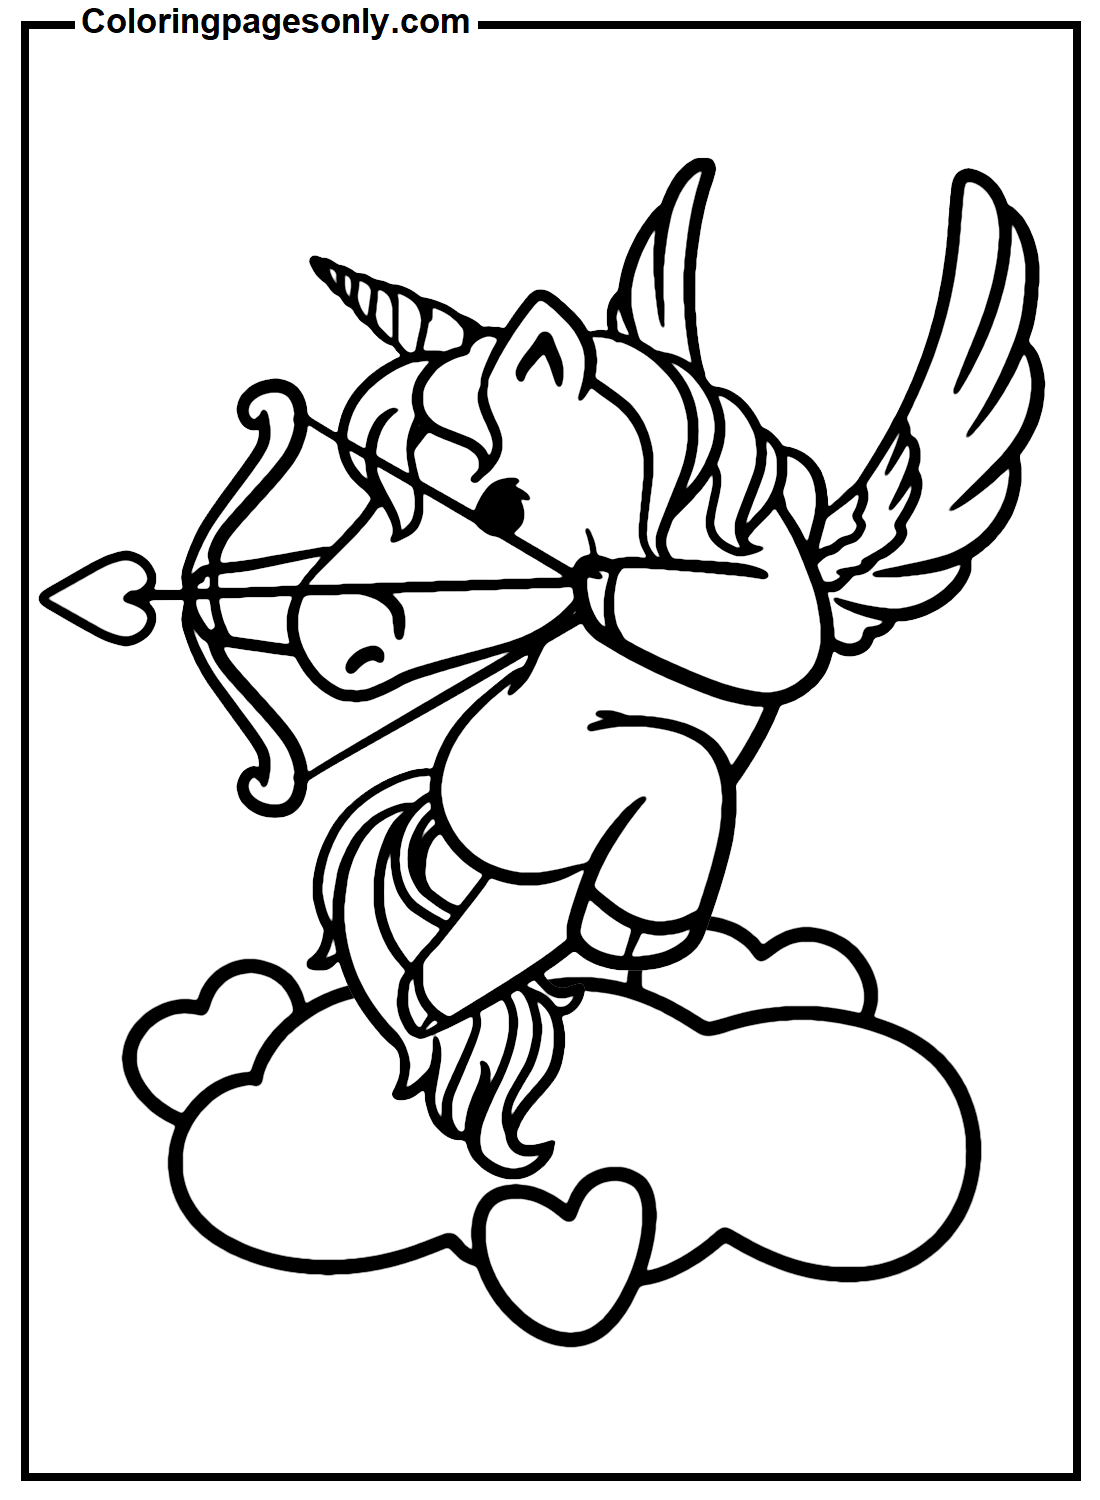 Unicorn Valentine's Day Cupid Coloring Pages